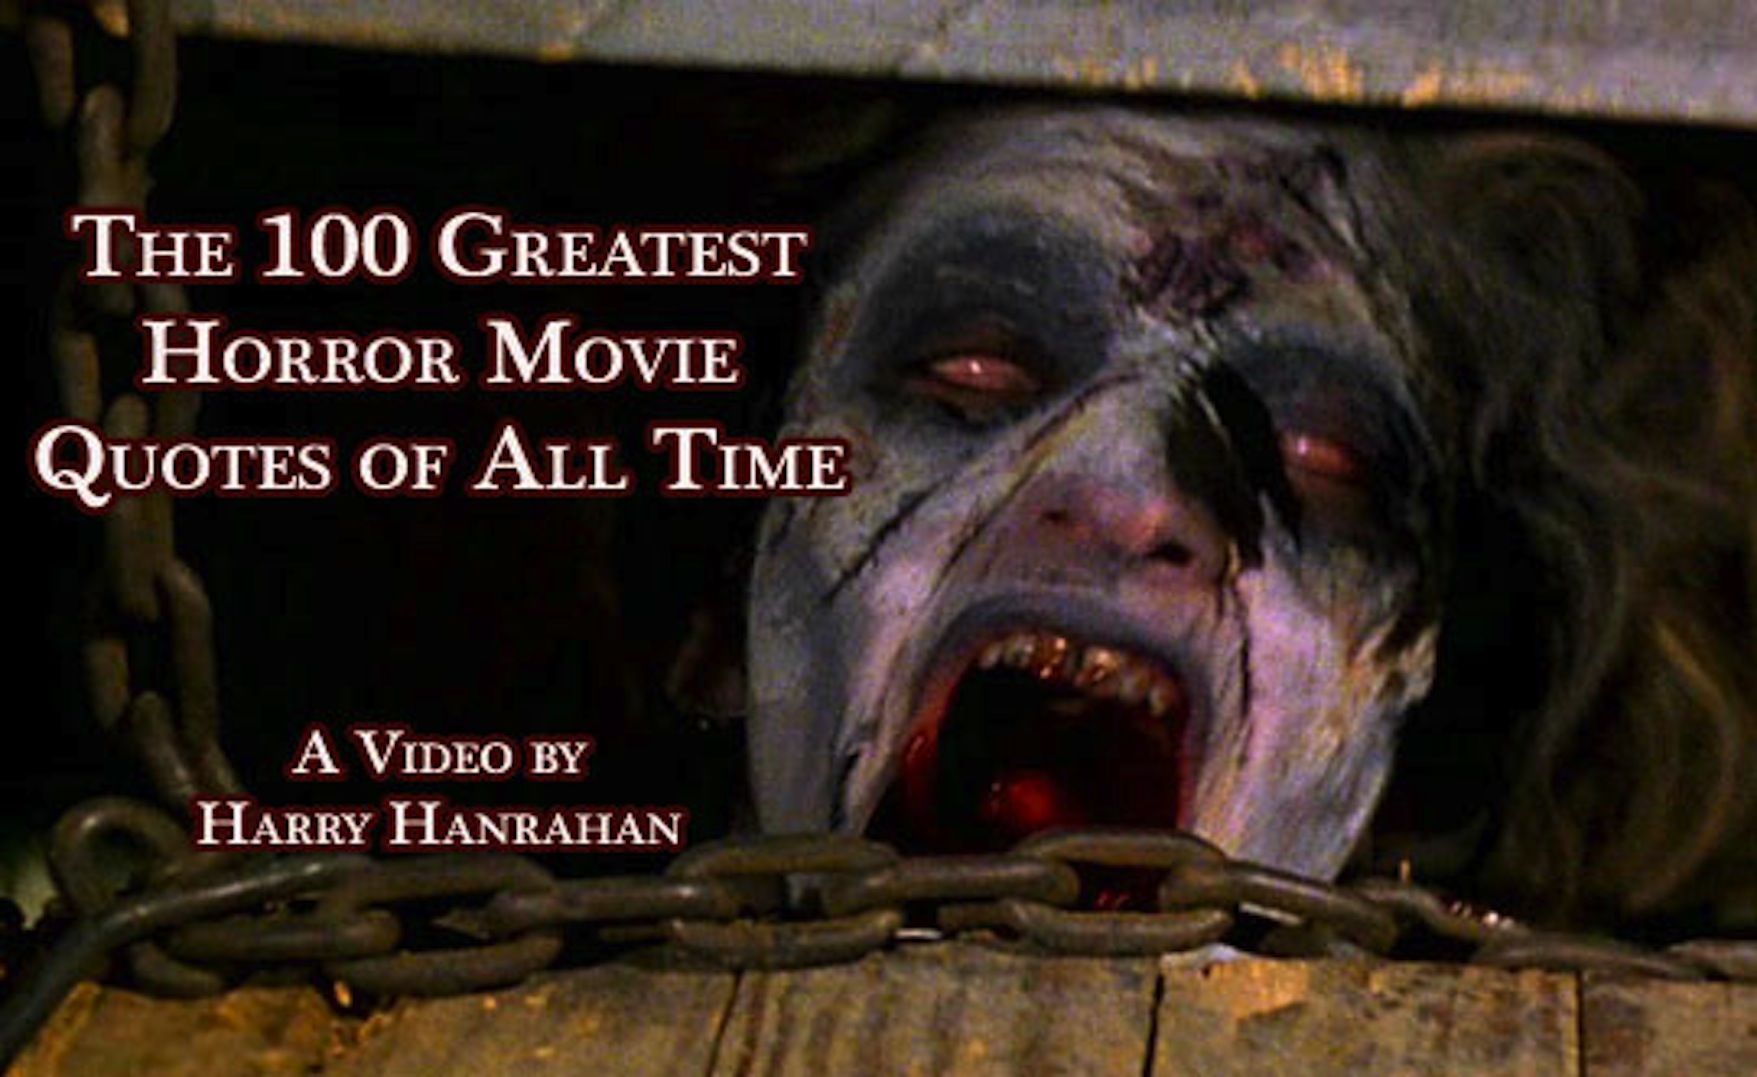 ... then look at the complete list of horror movies Hanrahan pulled from